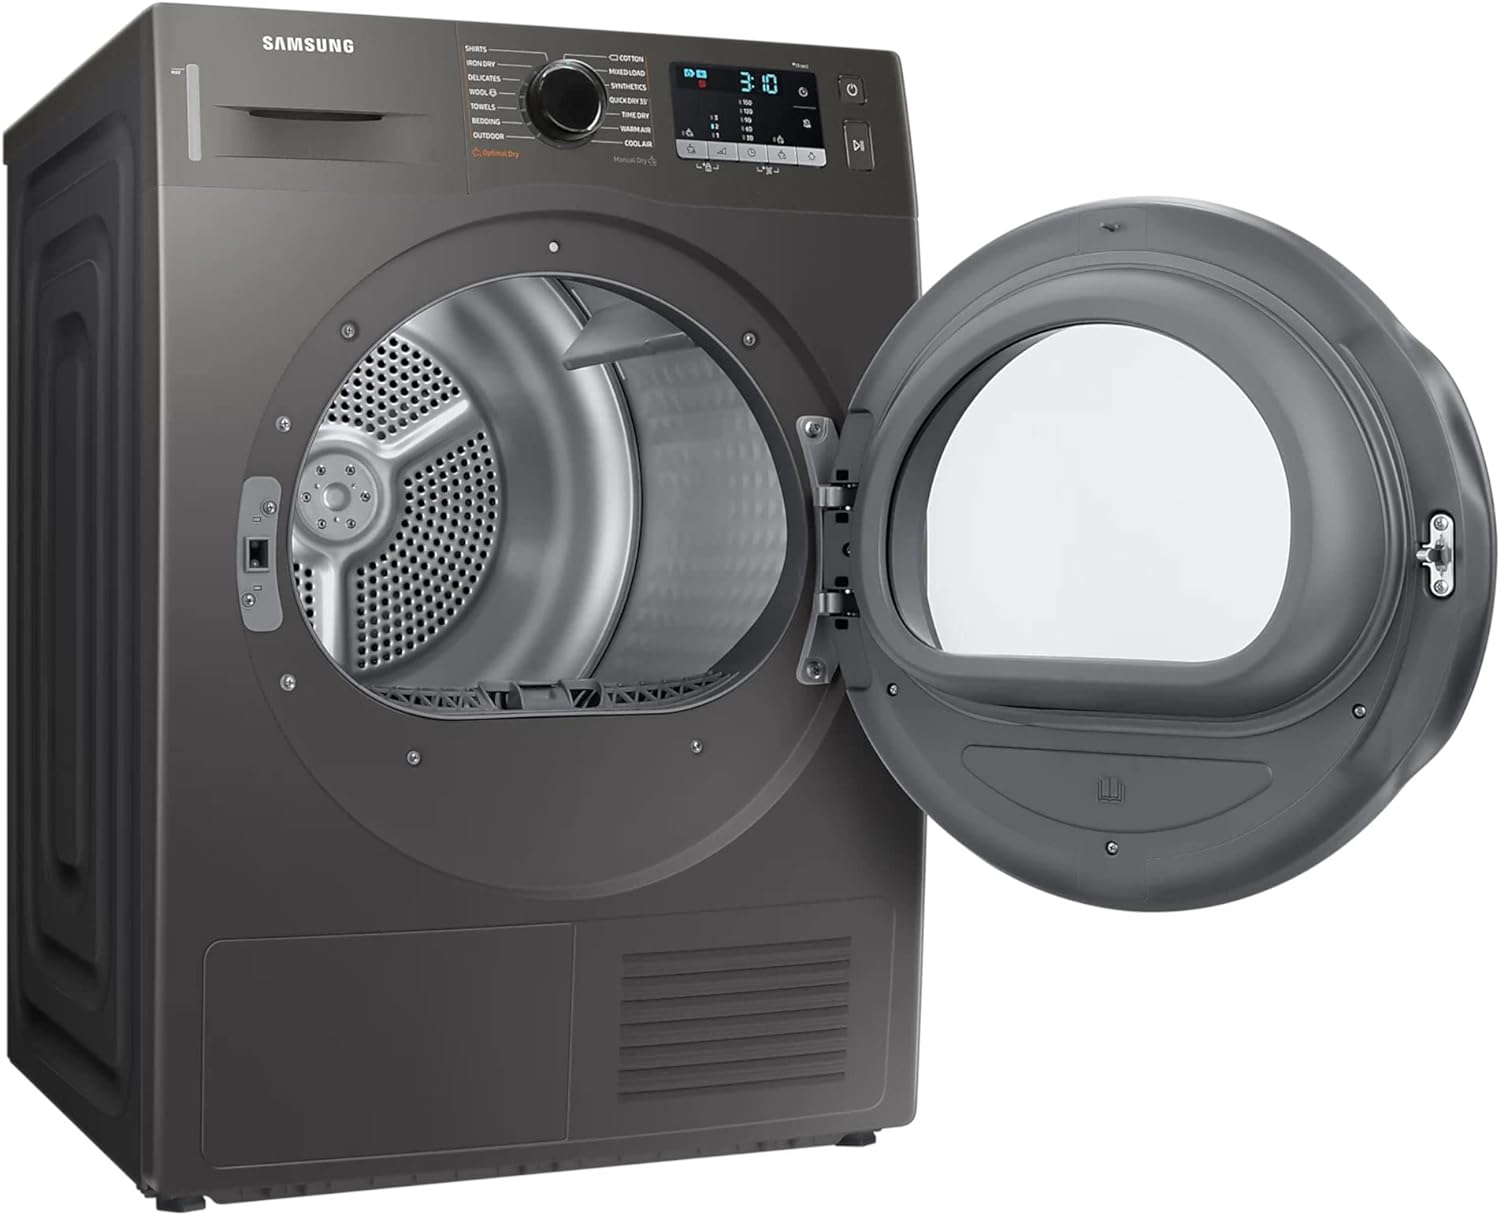 Samsung Series 5 DV80TA020AX/EU with OptimalDry™, Freestanding Heat Pump Tumble Dryer, 8 kg, Graphite, A++ Rated - Amazing Gadgets Outlet